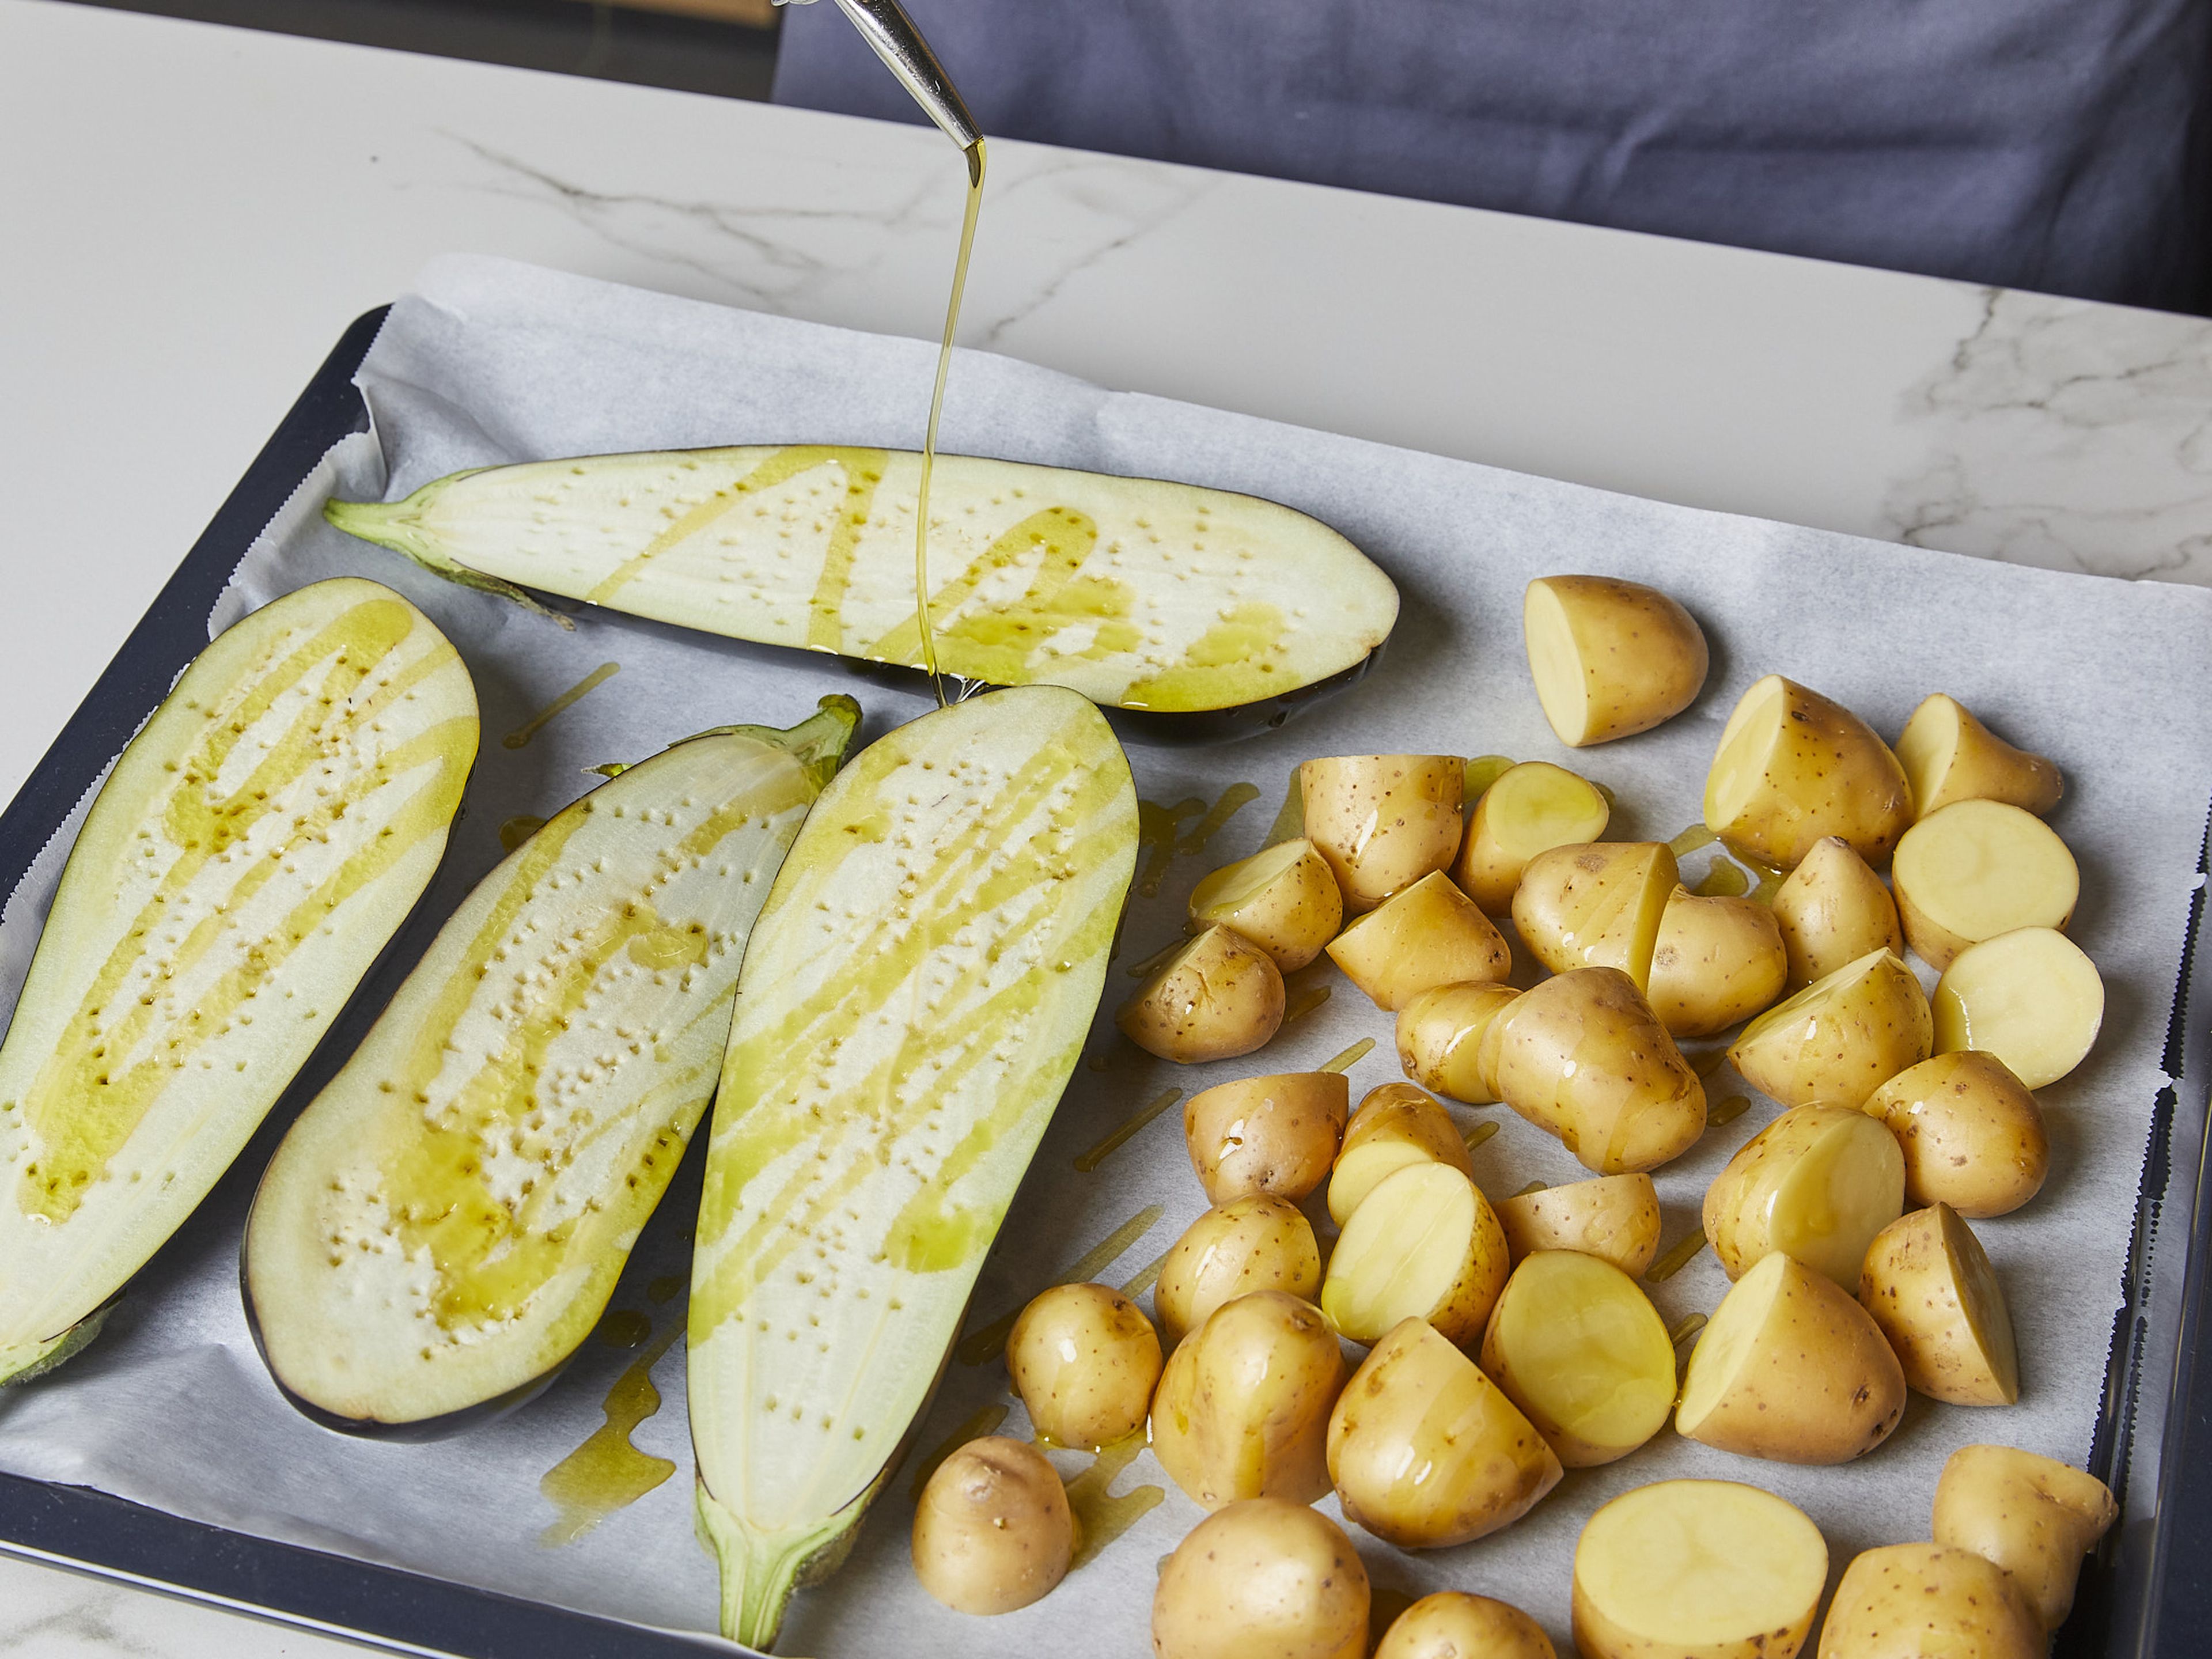 Cut eggplants in half lengthwise and pierce the cut surface several times with a fork. Place the eggplants on the baking sheet cut-side up. Drizzle with more olive oil and bake in the oven with the potatoes for approx. 40–50 min. or until the potatoes are golden brown and the eggplants are soft. In the last 10 min. of the baking time, add the unpeeled garlic cloves to the baking sheet.